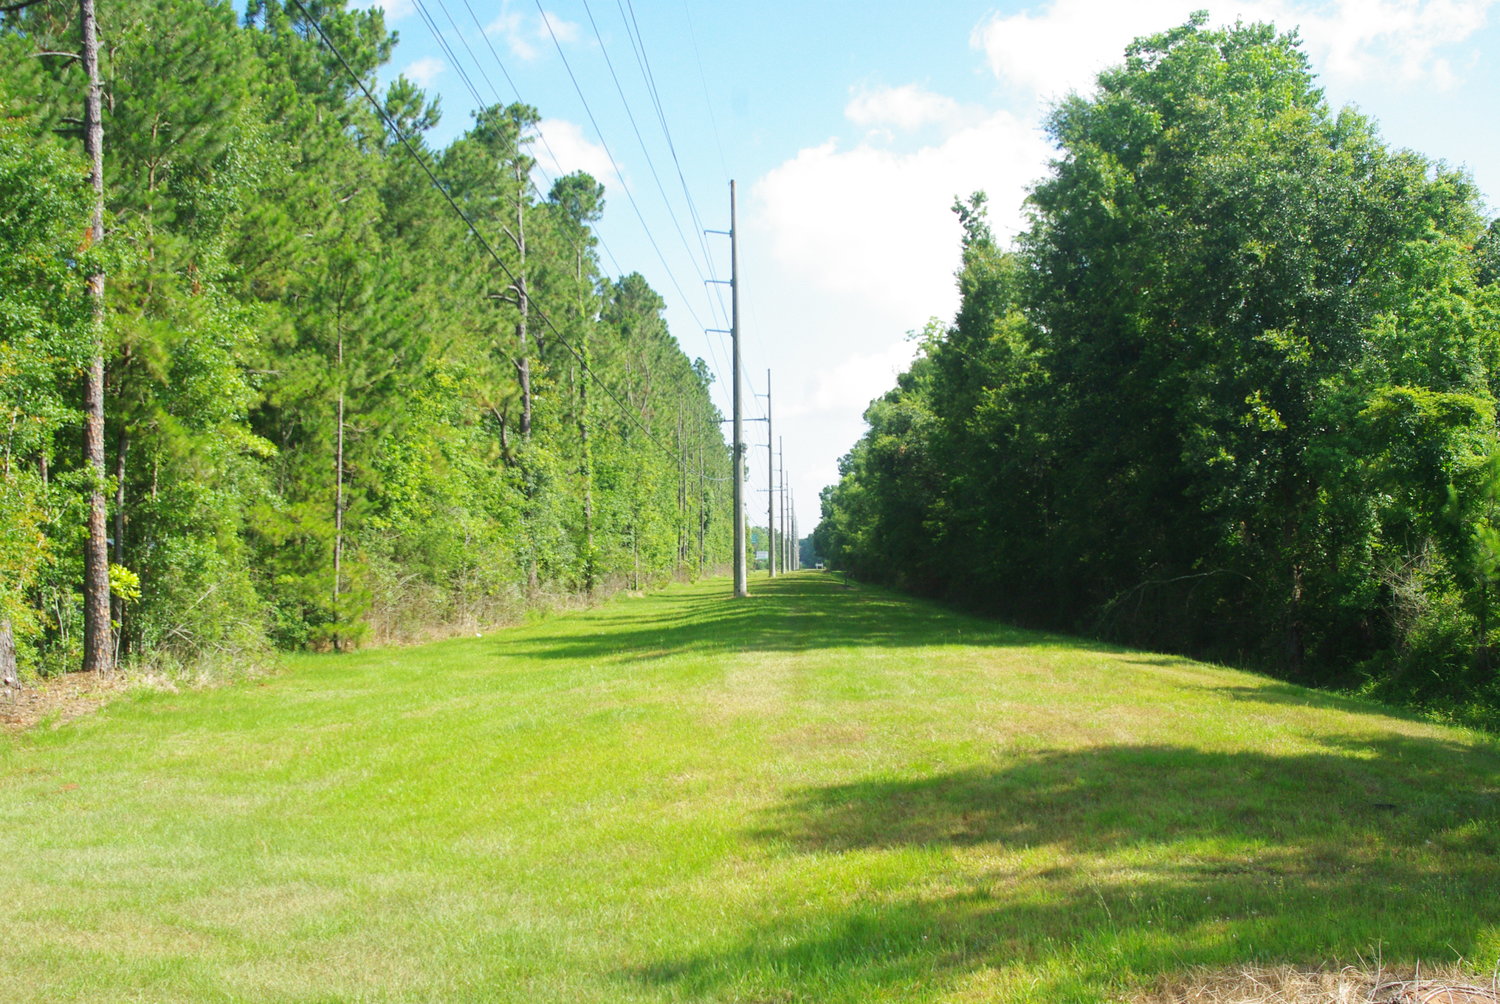 A walking and bicycling trail along the old L&N Railroad right of way between Foley and Bay Minette is one project being studied in the County Connectivity Plan.